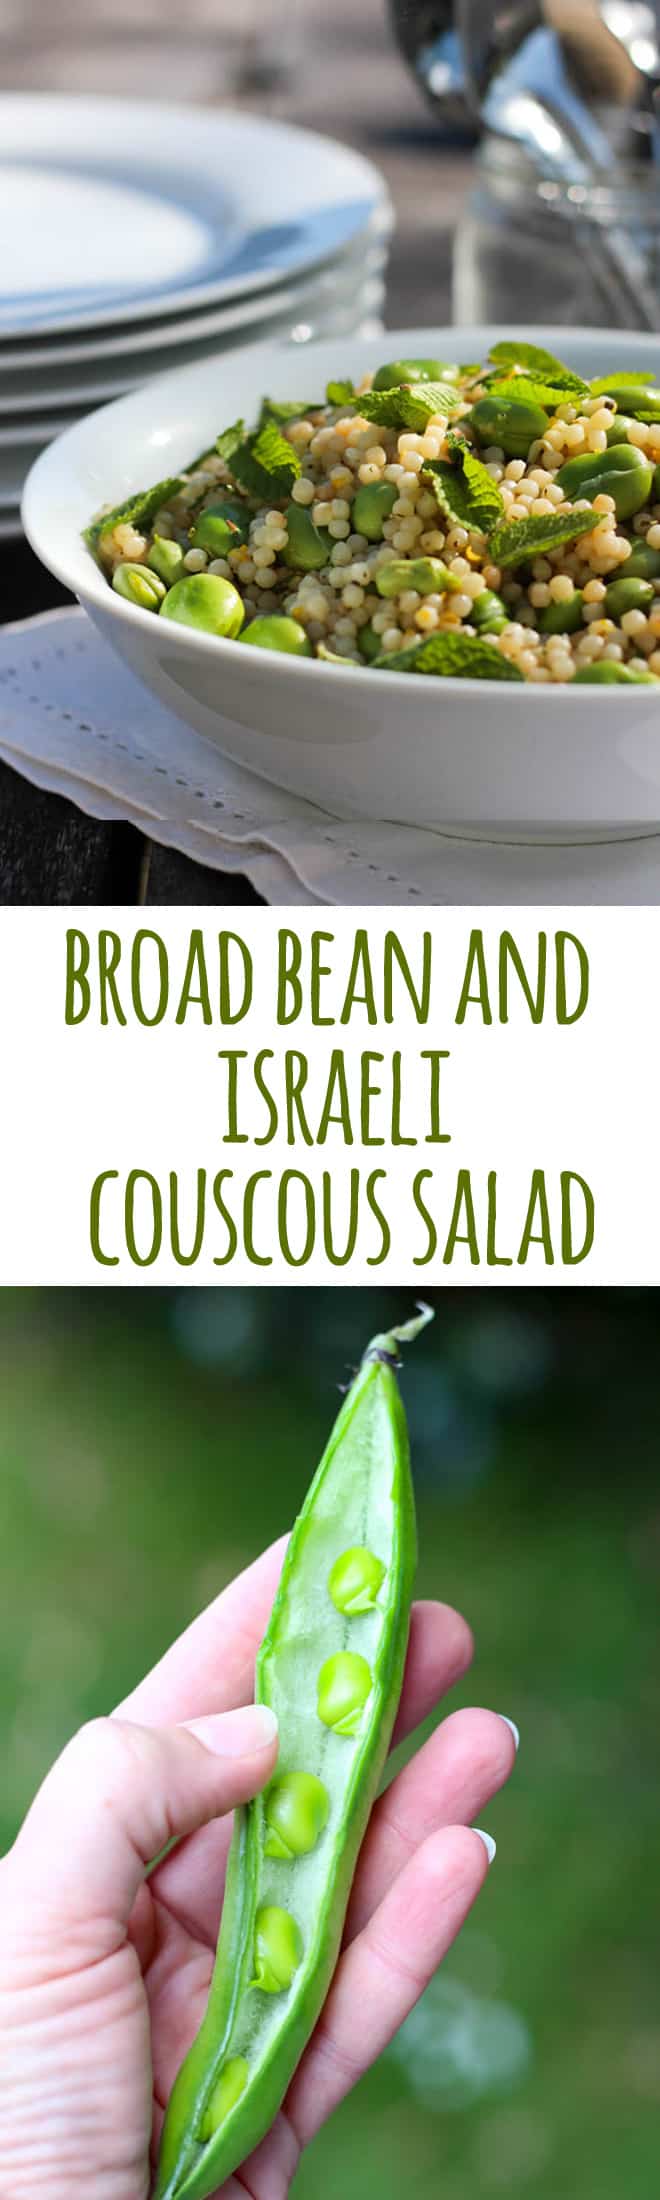 Broad bean and Israeli couscous salad. 